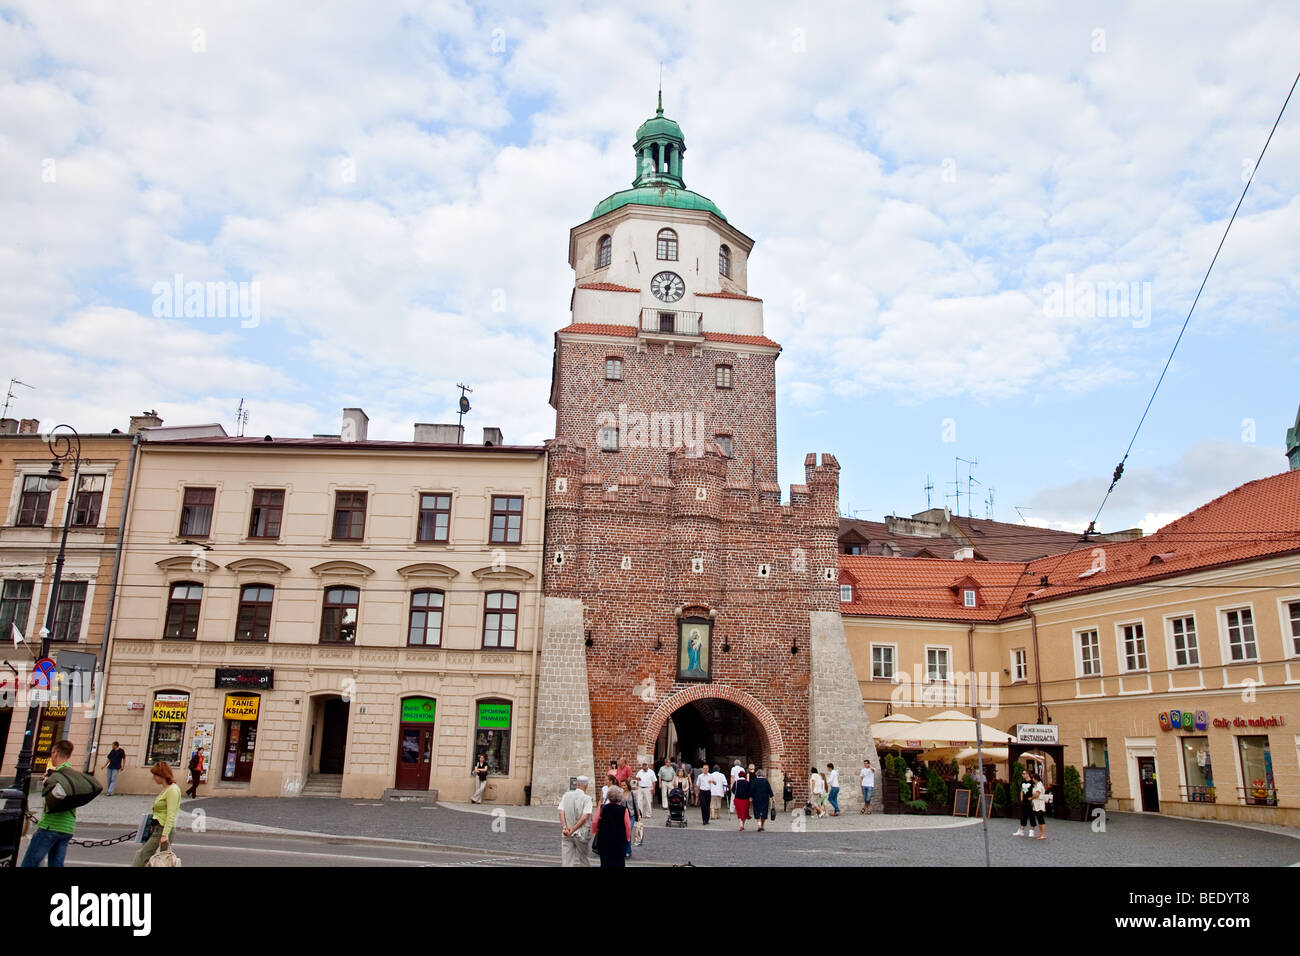 Old town of Lublin, Poland Stock Photo